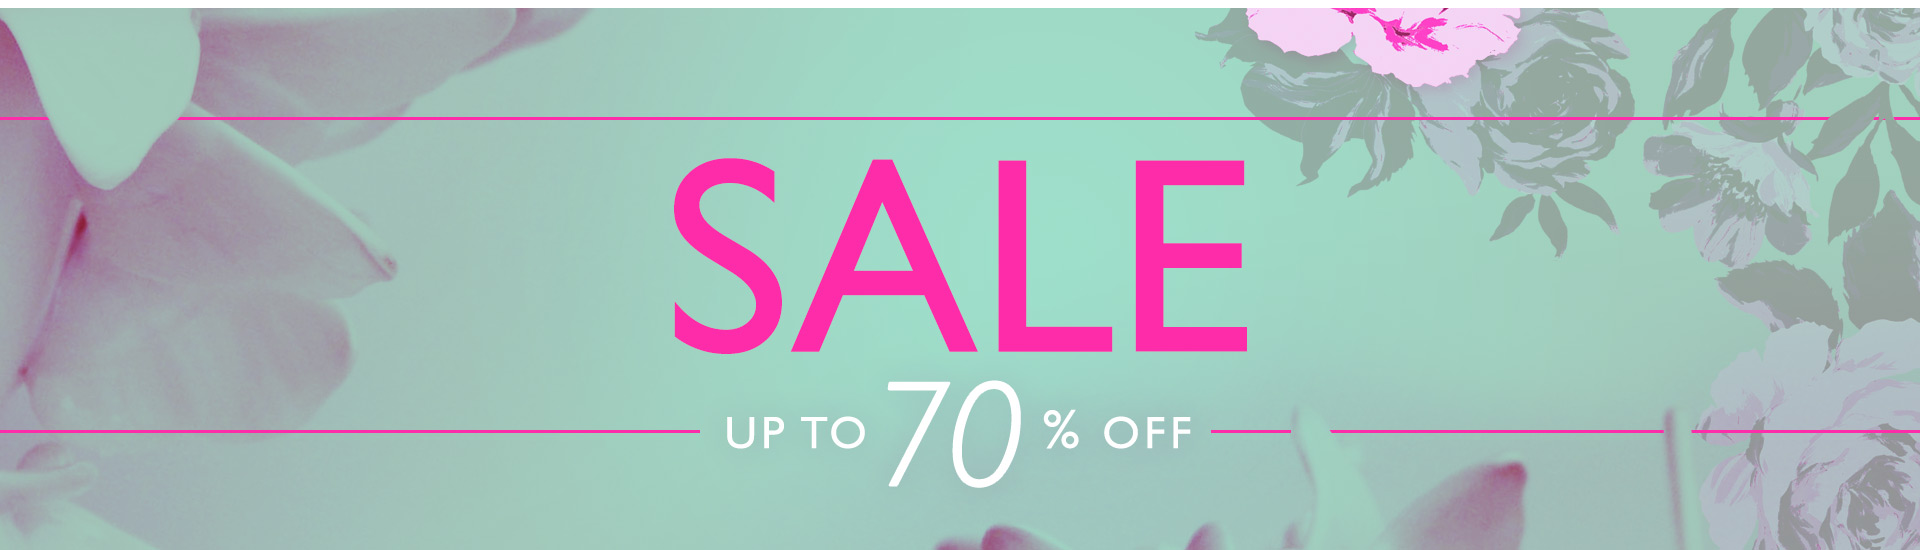 Apricot: Sale up to 70% off women's fashion clothes & accessories